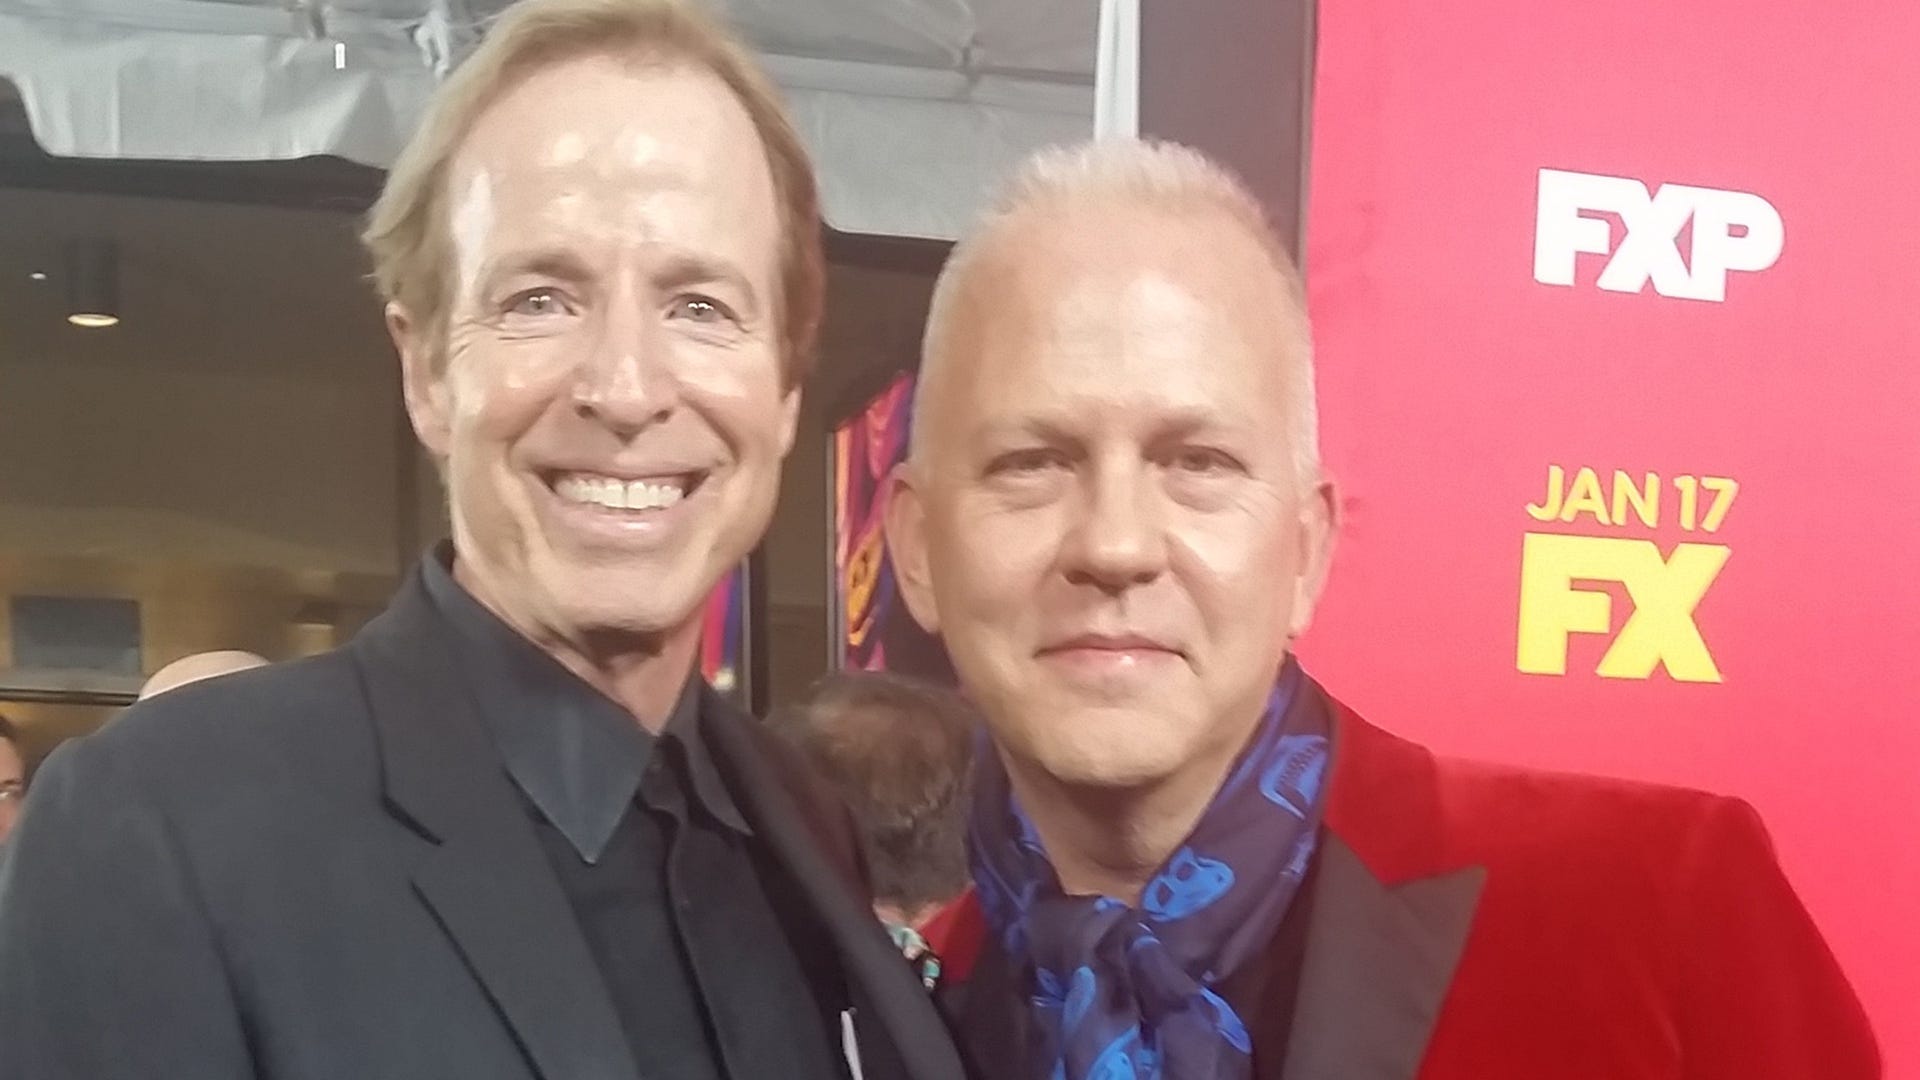 Terry Sweeney and Ryan Murphy at The Assassination of Versace premiere in Los Angeles